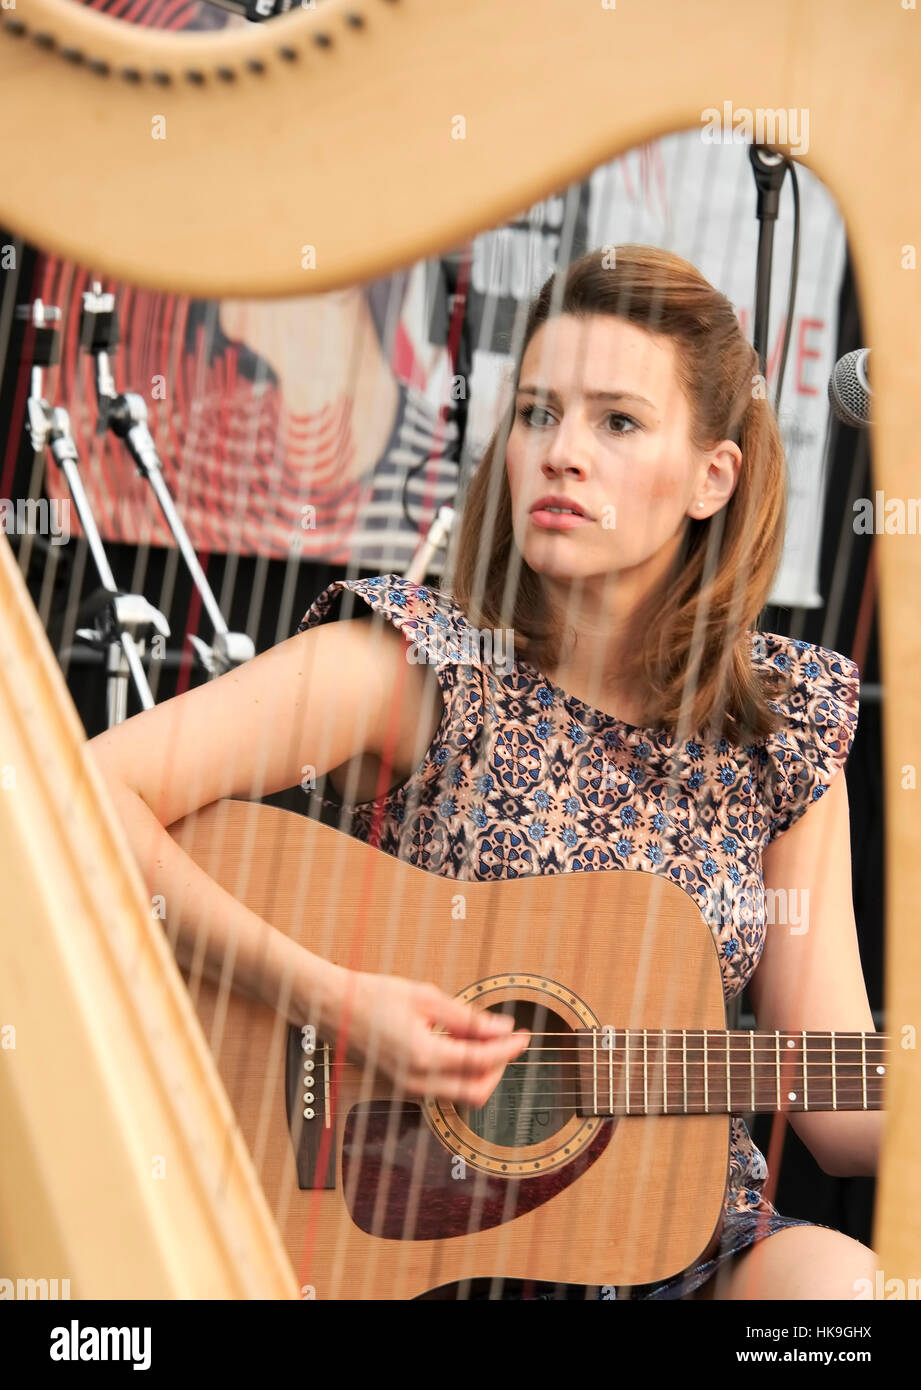 Sophie of the group Huradal playing guitar as seen through the harp. Stock Photo